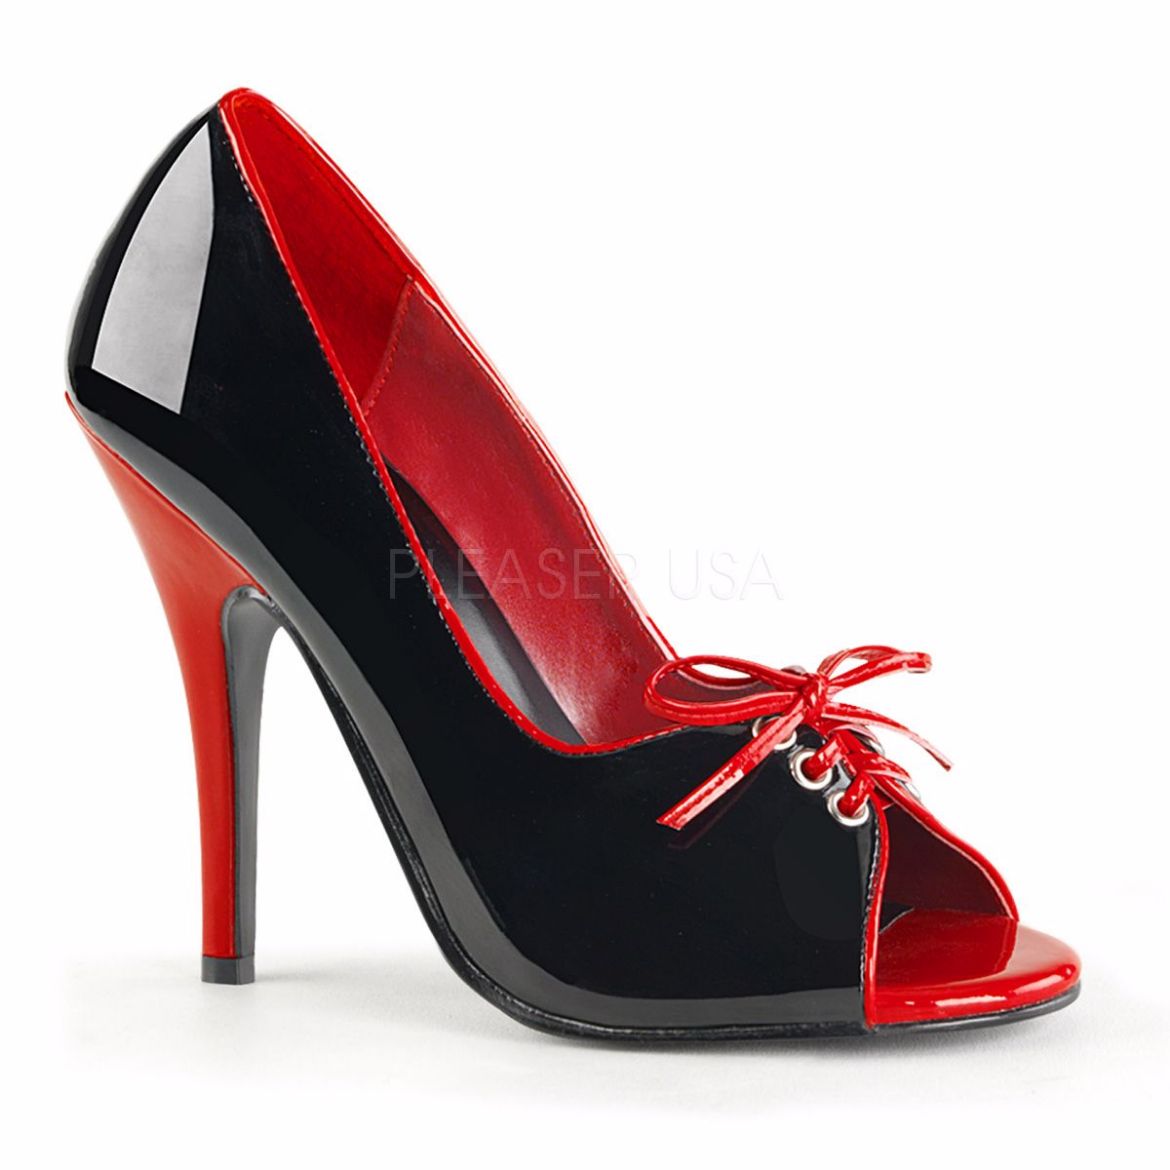 Product image of Pleaser Seduce-216 Black-Red Patent, 5 inch (12.7 cm) Heel Court Pump Shoes